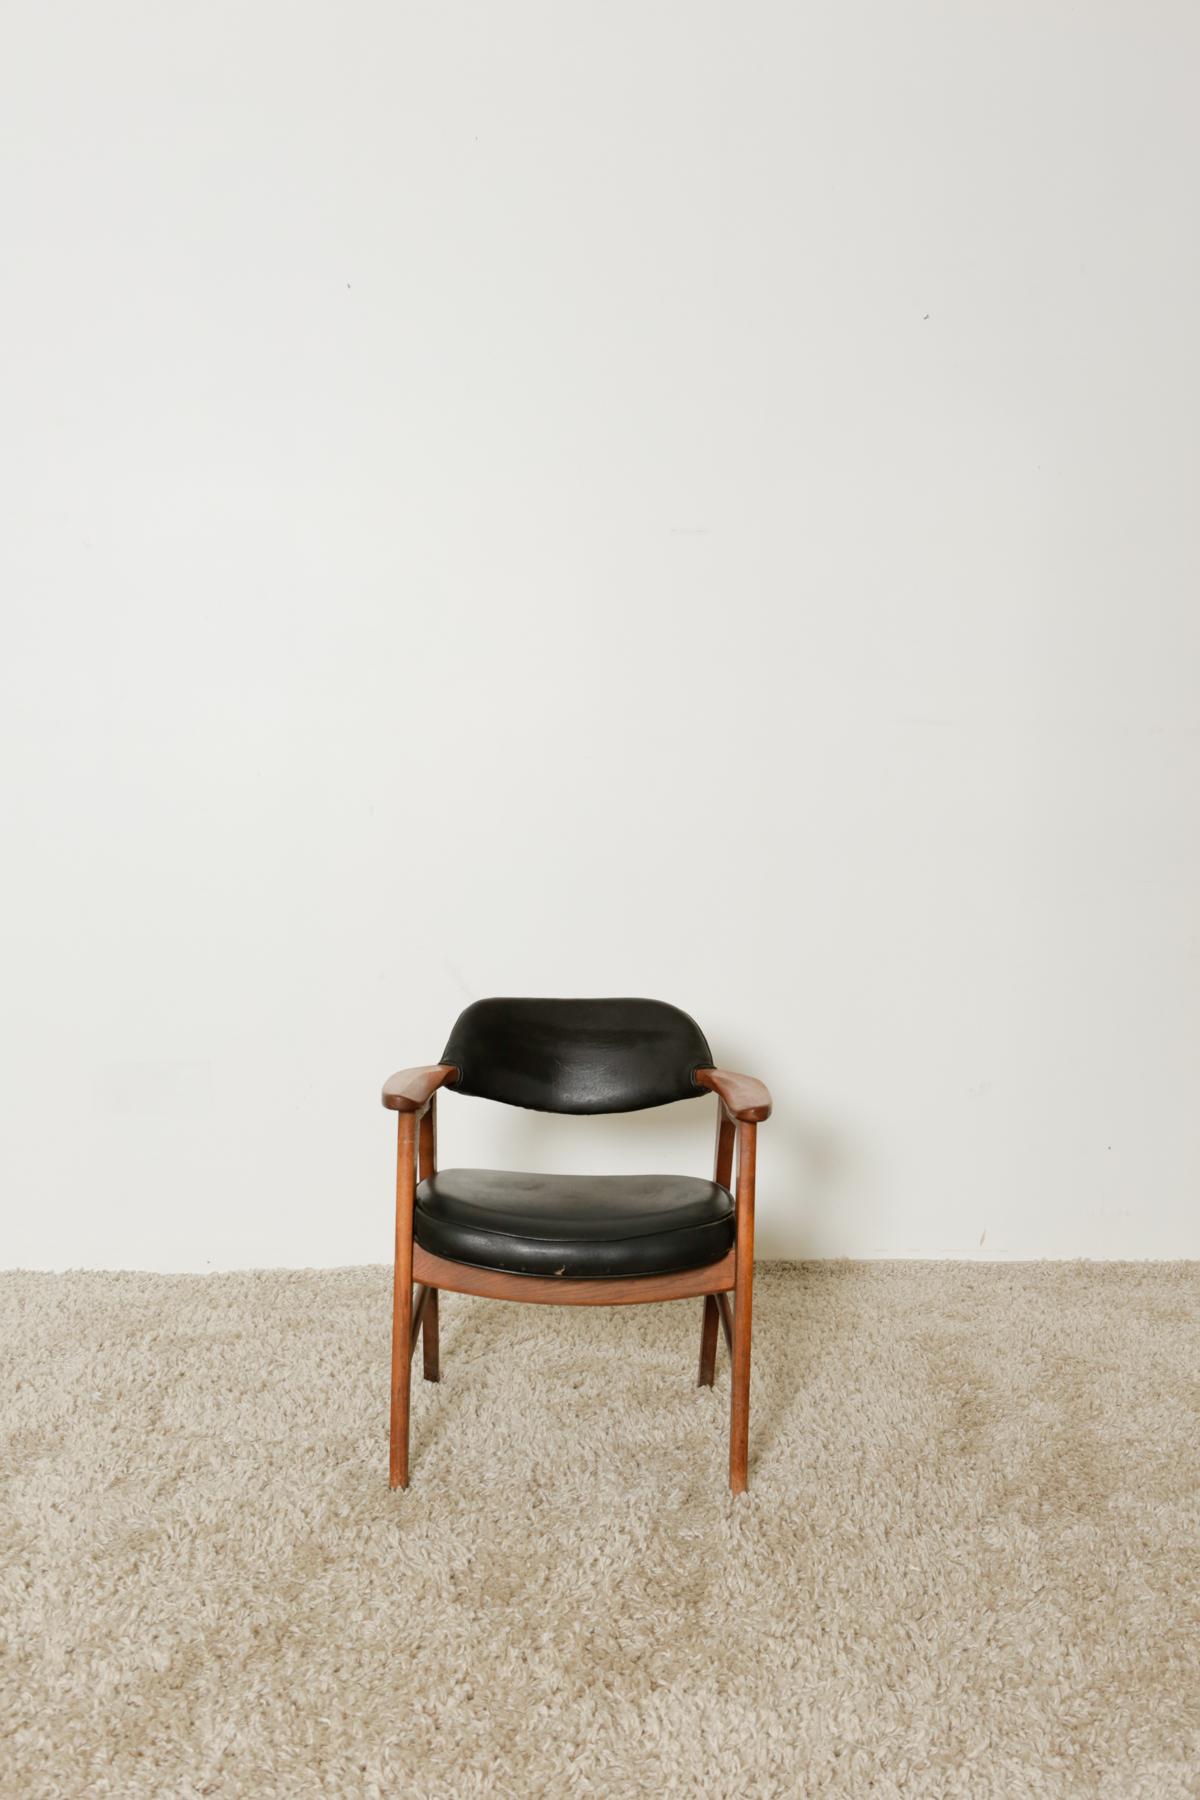 Mid-Century Modern walnut armchair

This classic MCM armchair is made of solid walnut and features a floating backrest in black vinyl. Comfortable, roomy “madmen” style chair. Enjoy your work in comfort with this chair. In good condition. Wear